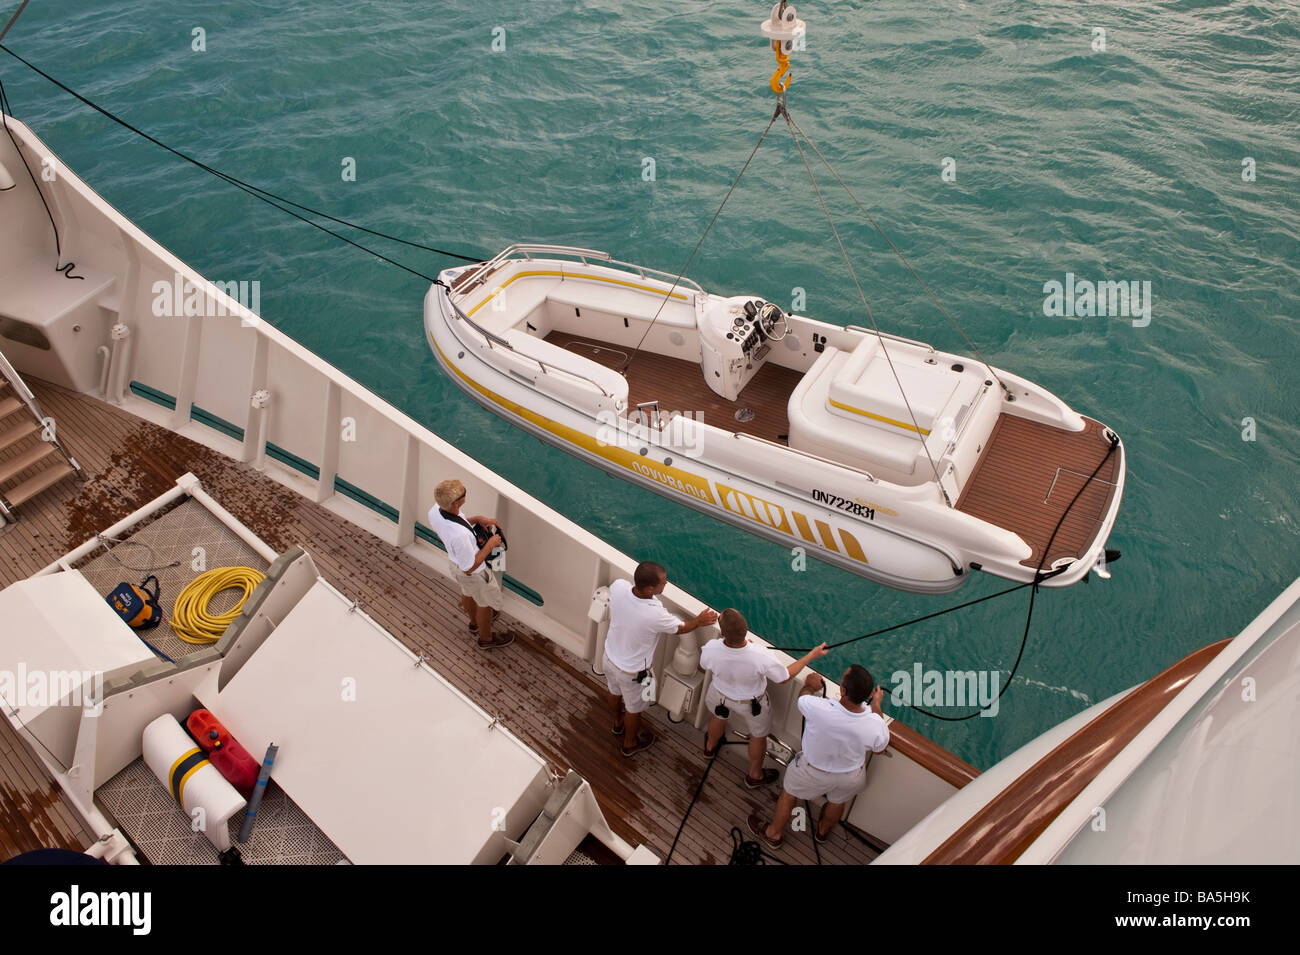 Crew craning the tender on the foredeck of superyacht 'Big Aron' into the water Stock Photo